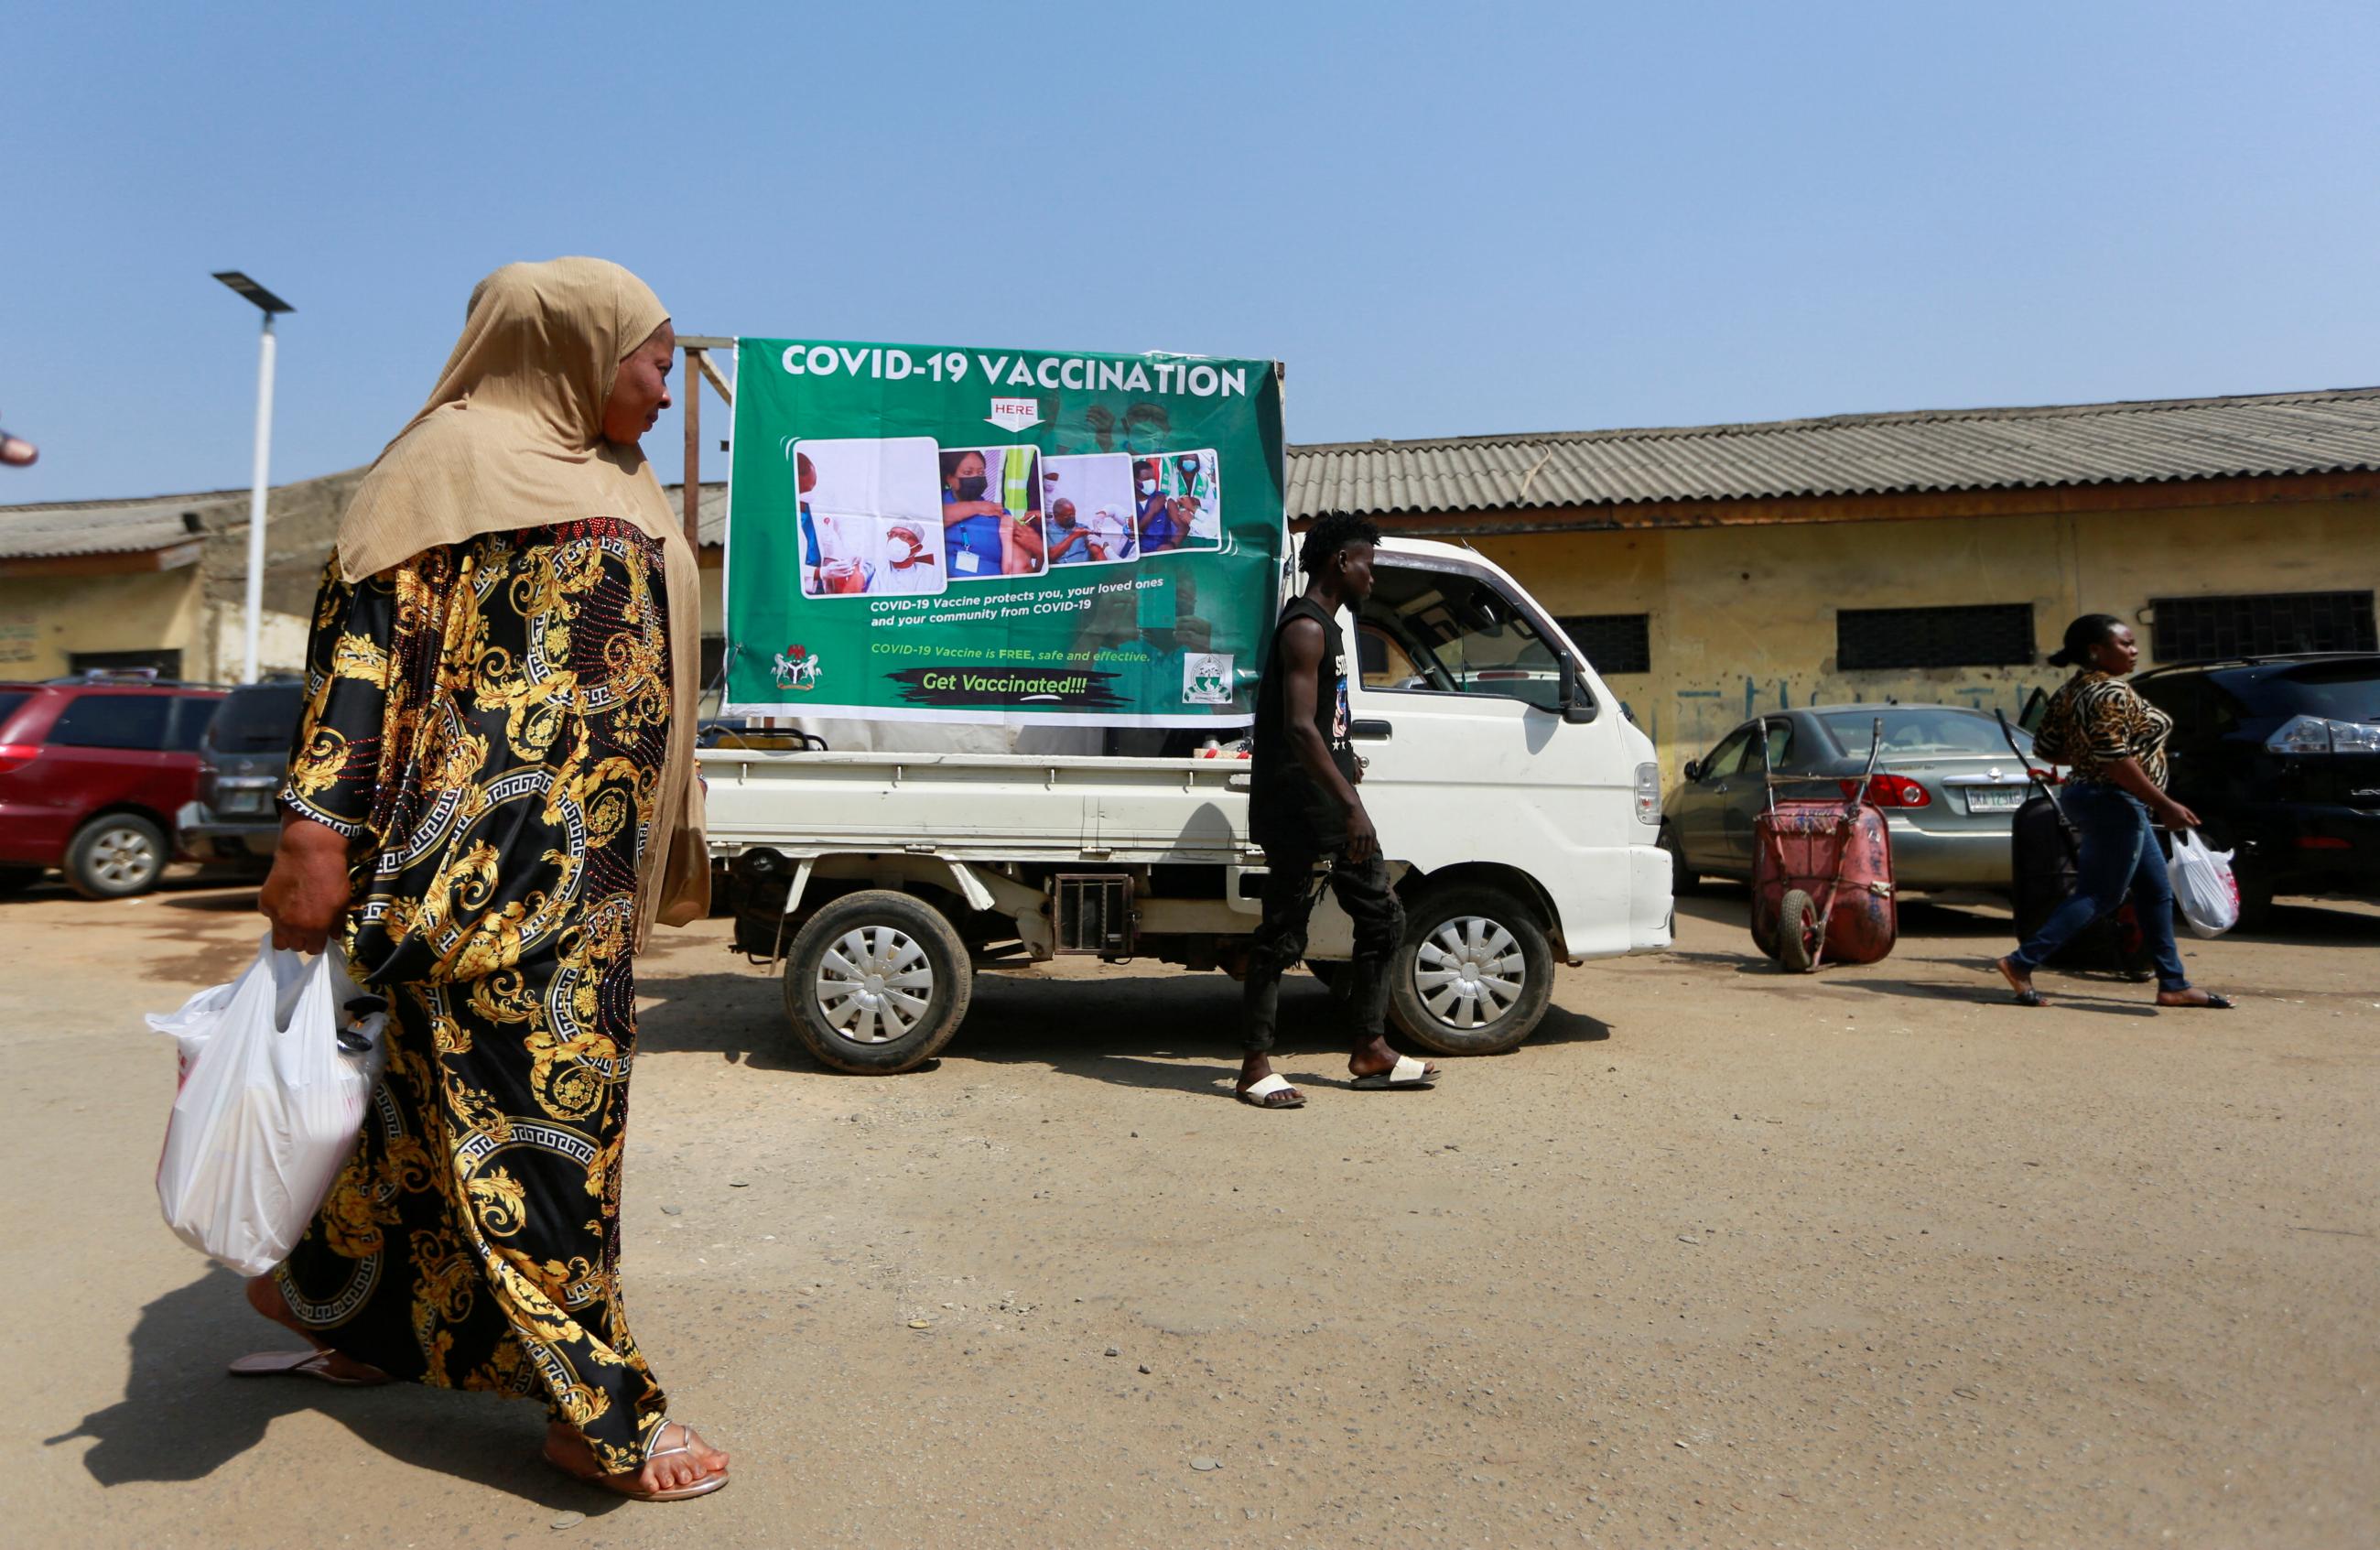 A woman walks past a COVID-19 campaign truck during a mass vaccination exercise at Wuse market in Abuja, Nigeria, on January 26, 2022.